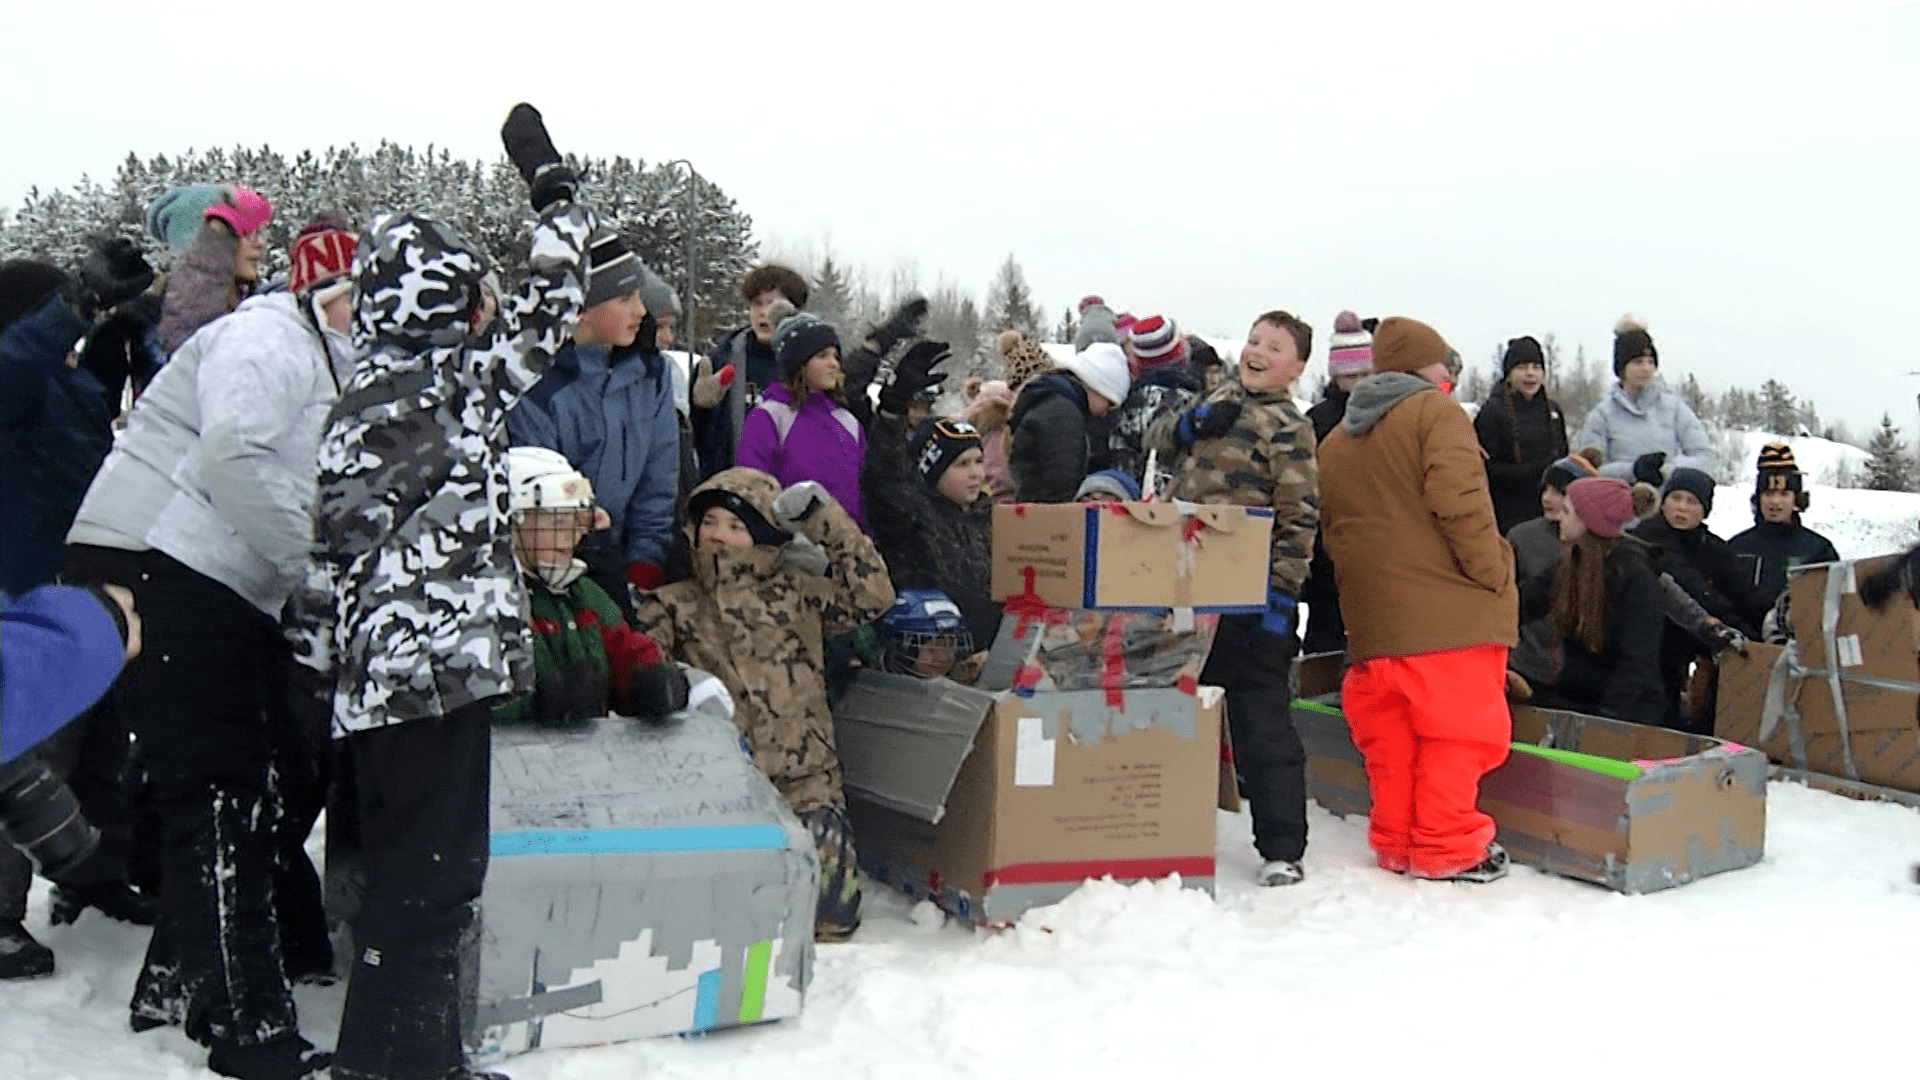 Students racing in cardboard-built sleds.